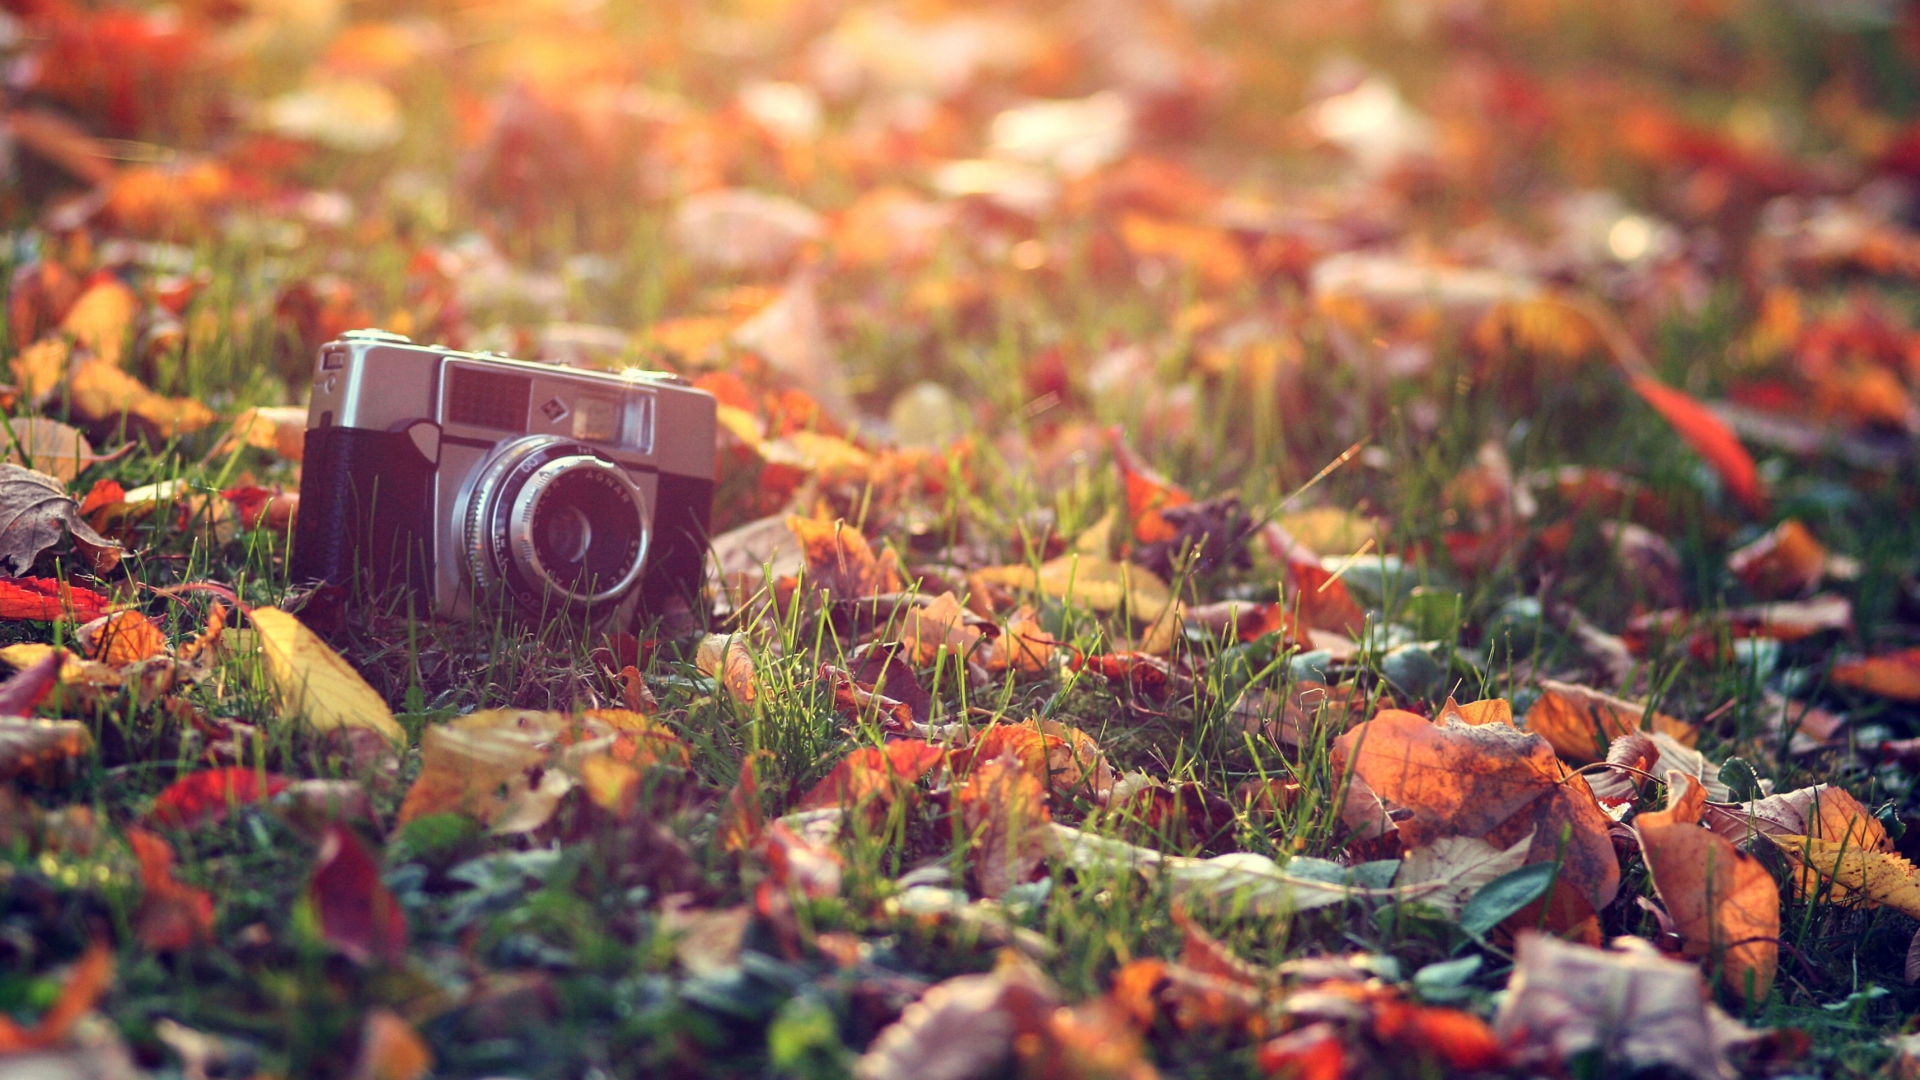 Old Camera On Green Grass And Autumn Leaves wallpaper 1920x1080